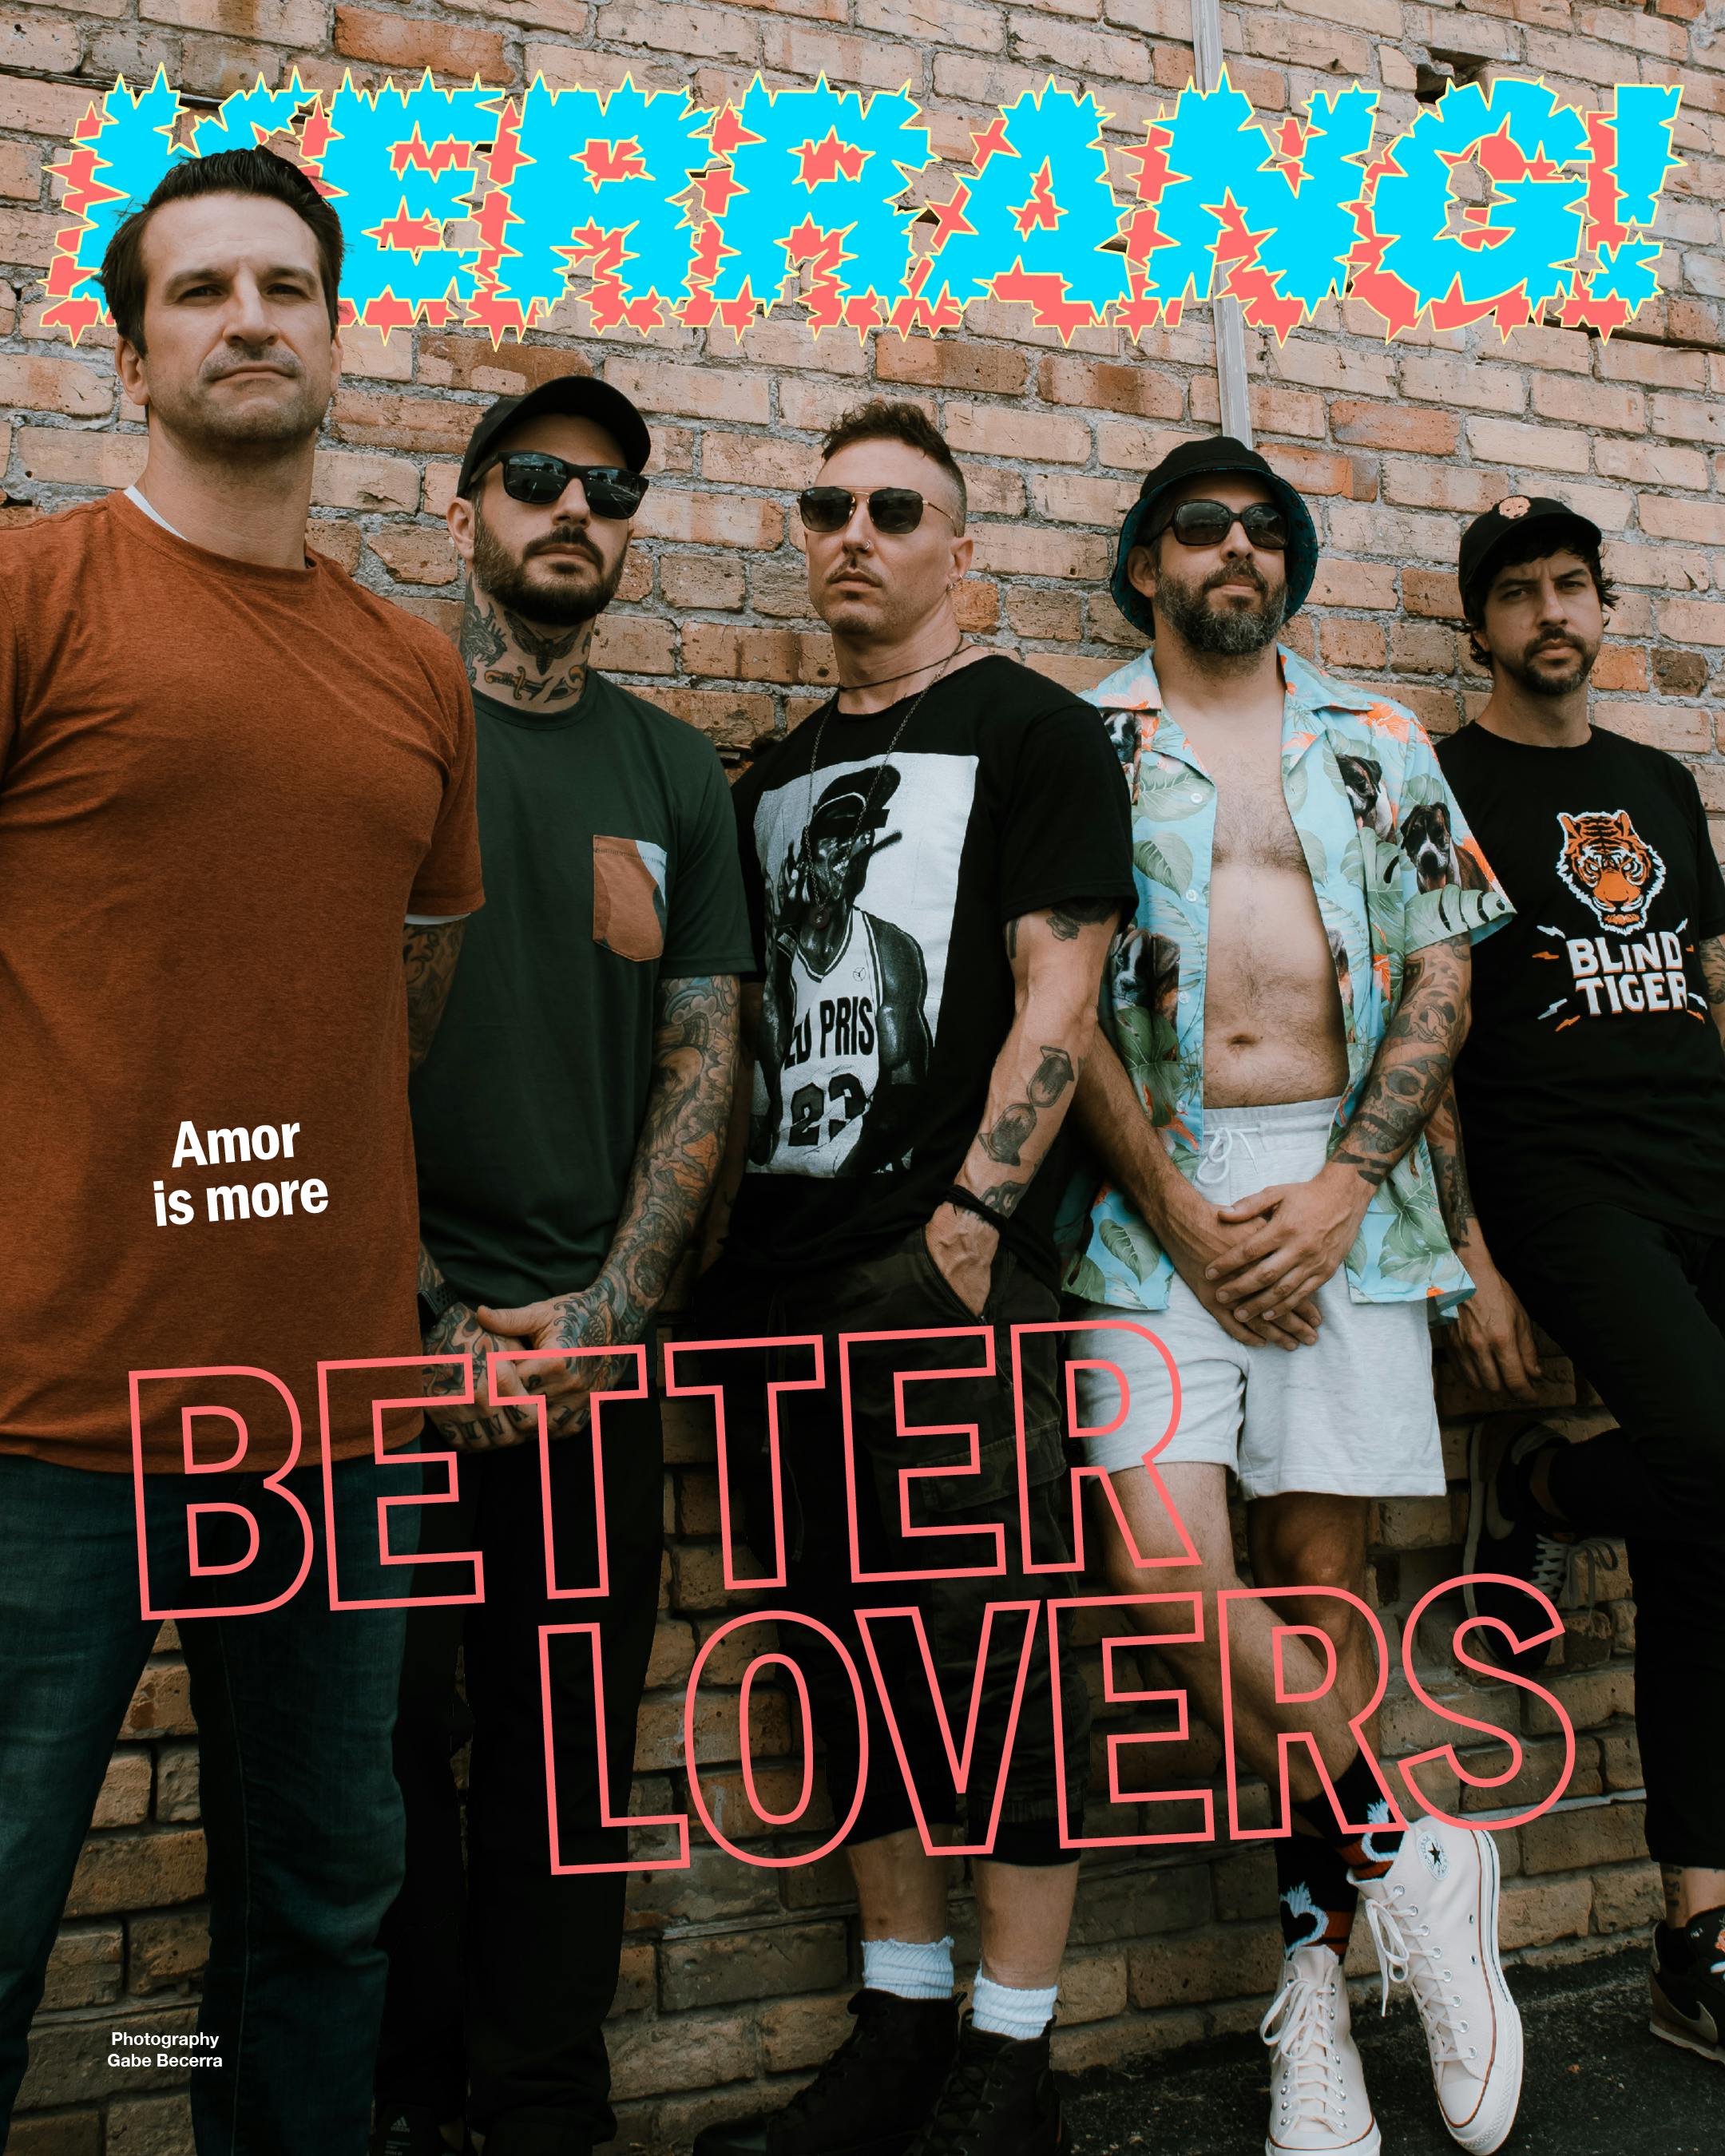 Better Lovers: “This is so much more than a side-gig. This is a fire that burns inside of us”